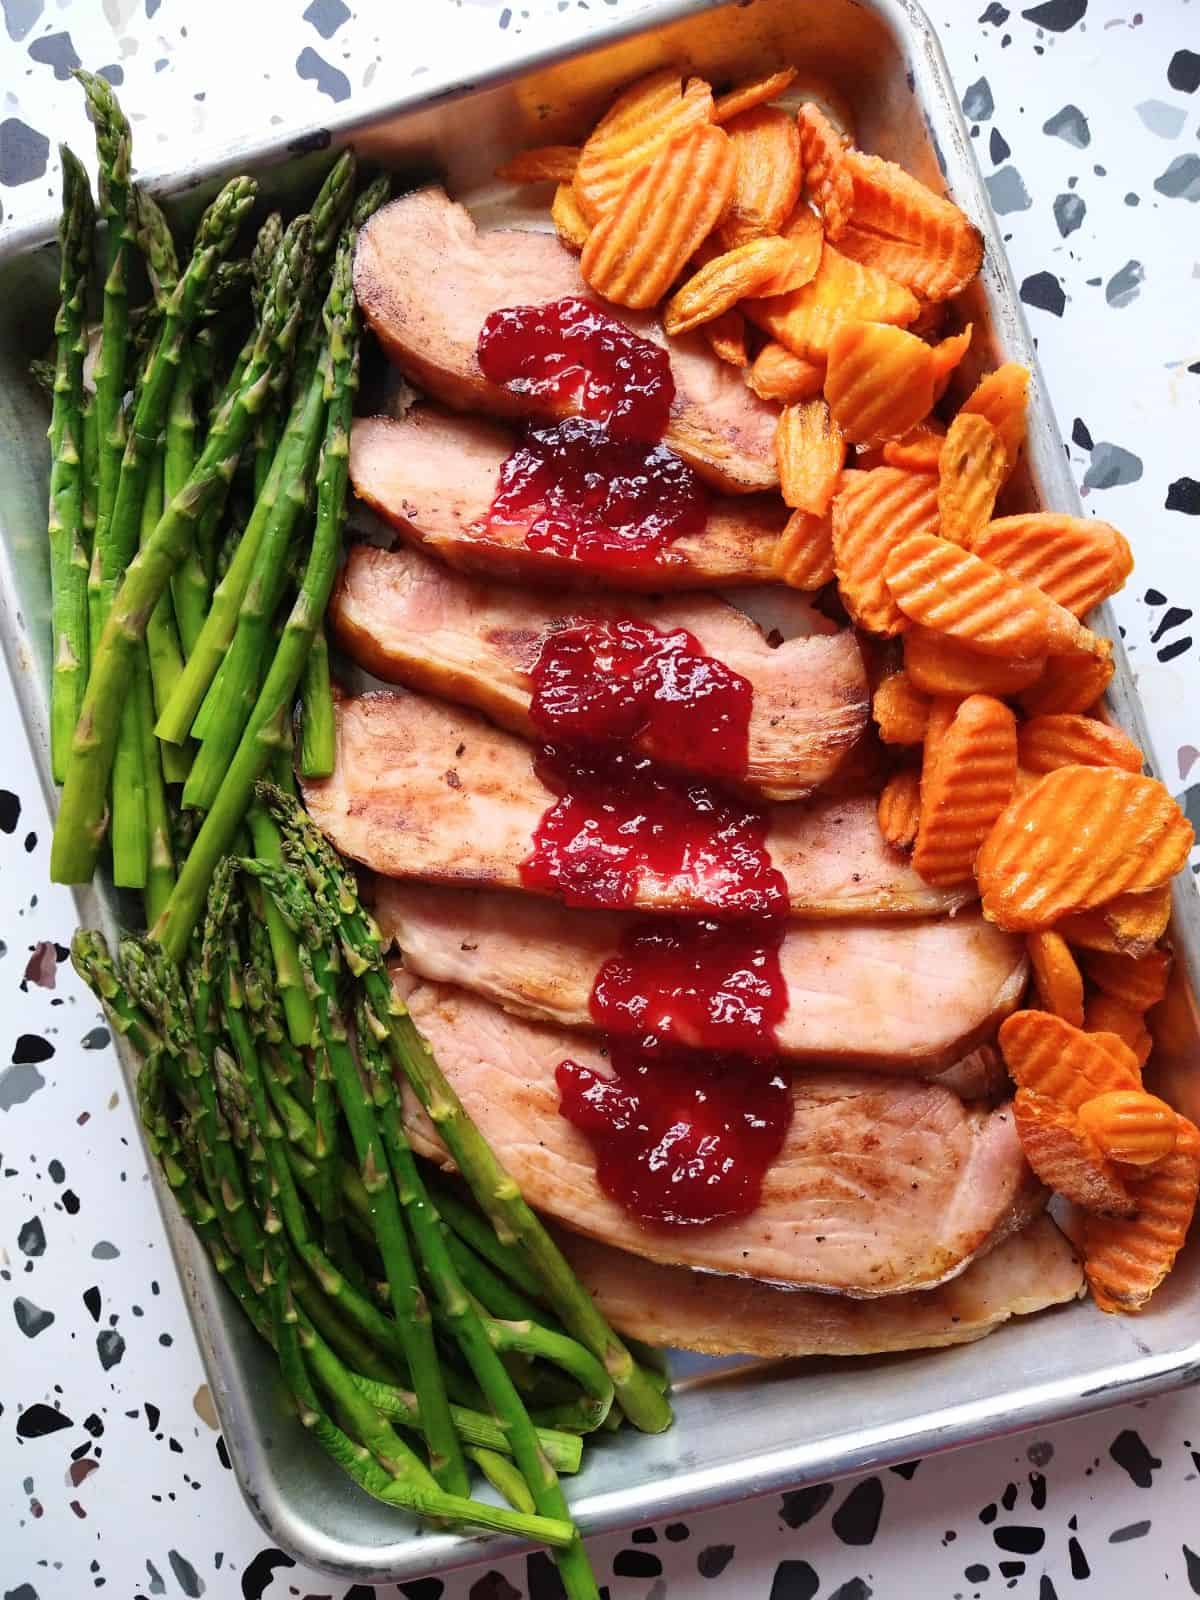 Cooked sliced ham on a sheet pan with asparagus and crinkled cut carrots. The ham has tart cherry ham on it. The sheet pan is sitting on a white table. 